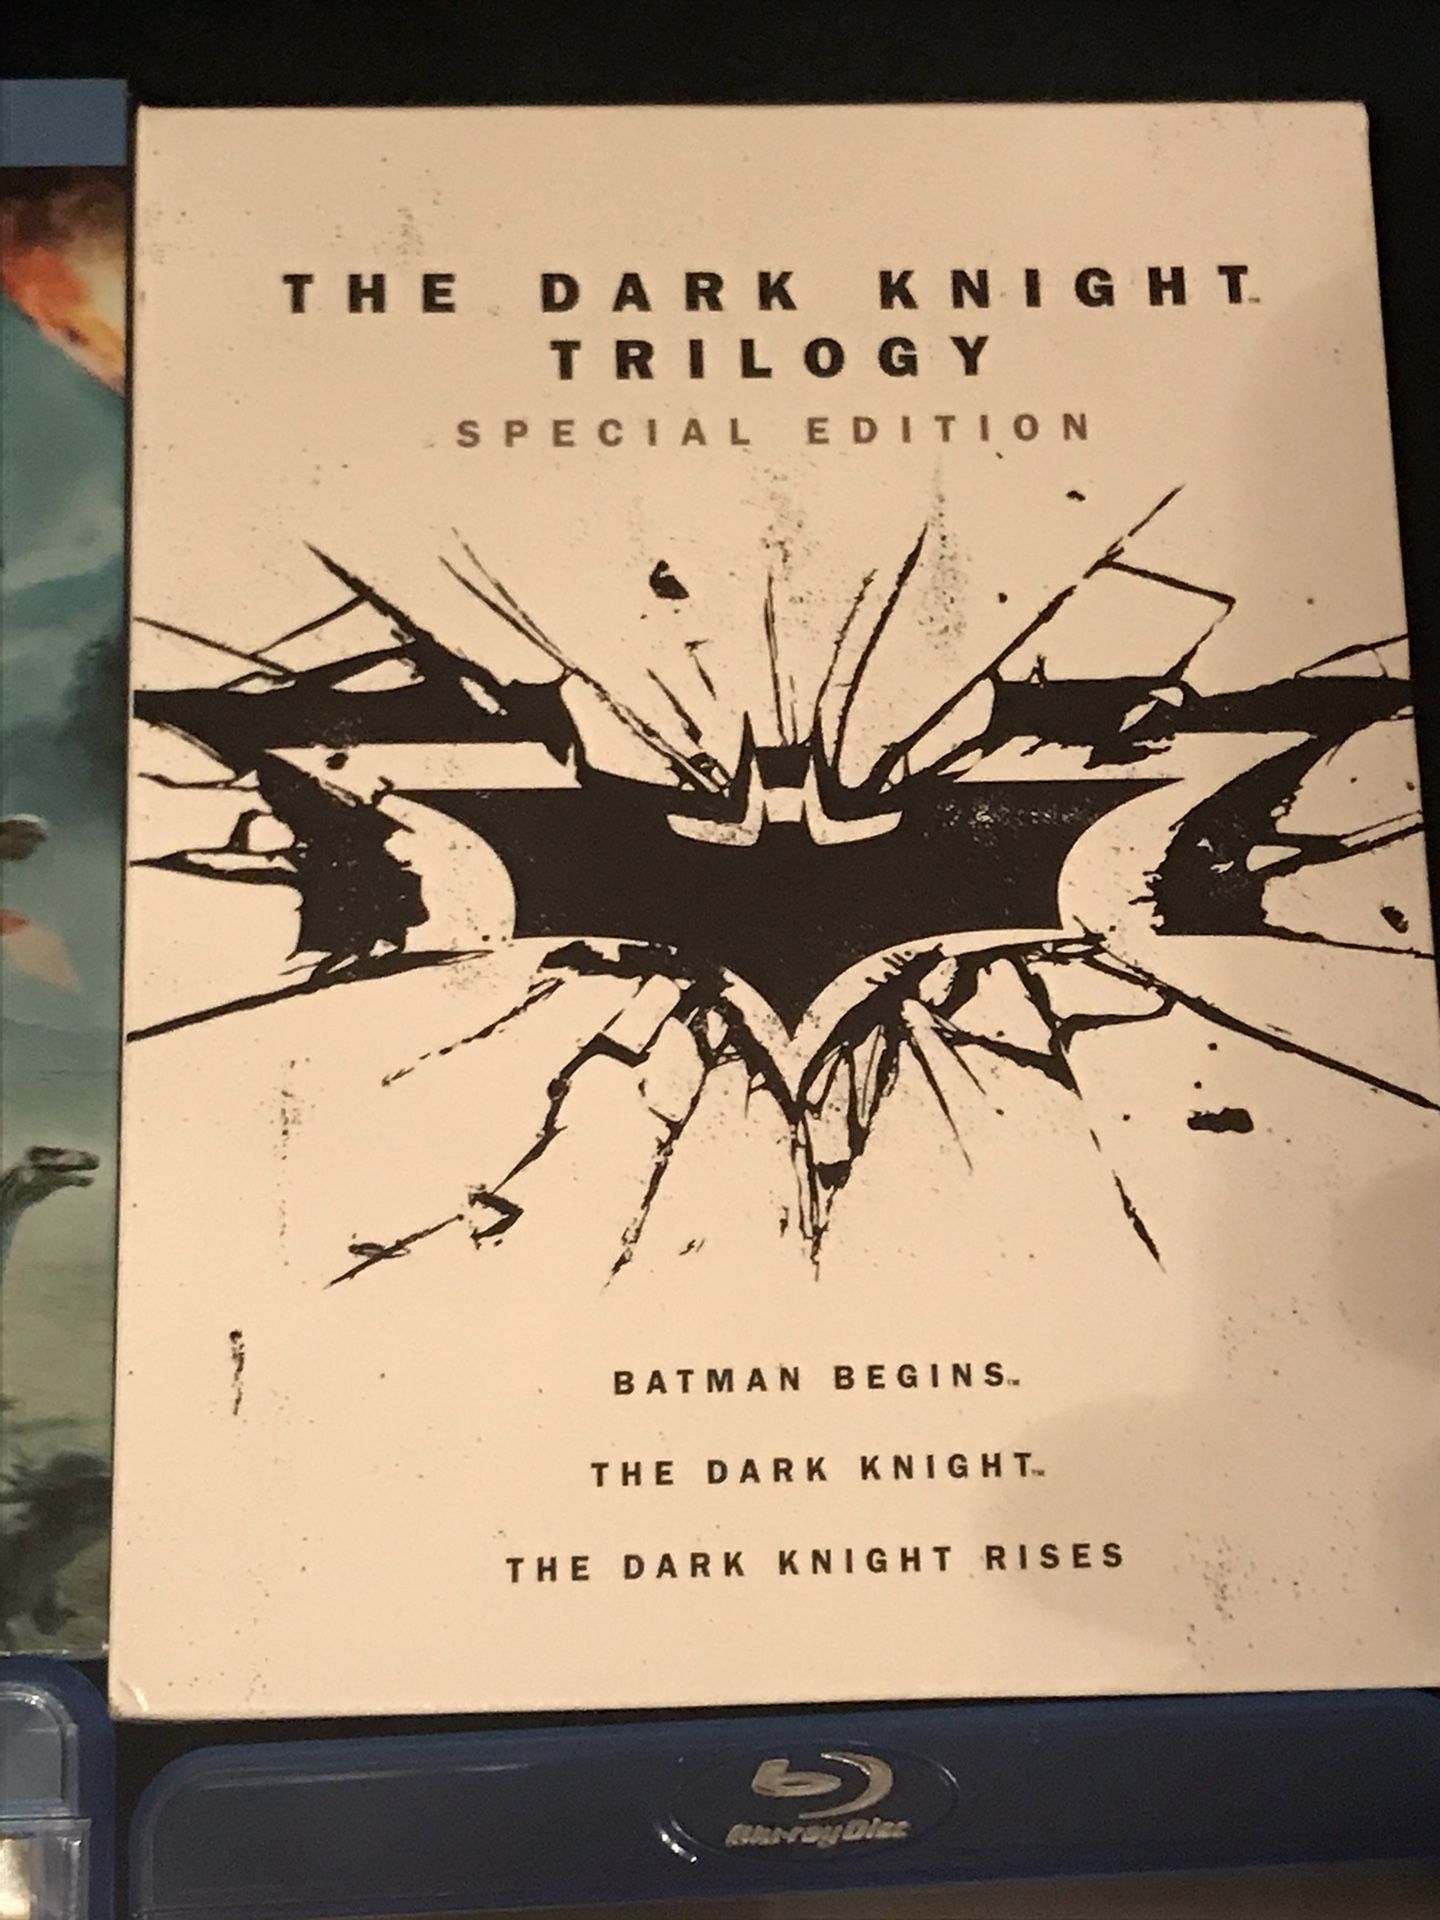 The Dark Knight Trilogy Special Edition Blu-ray